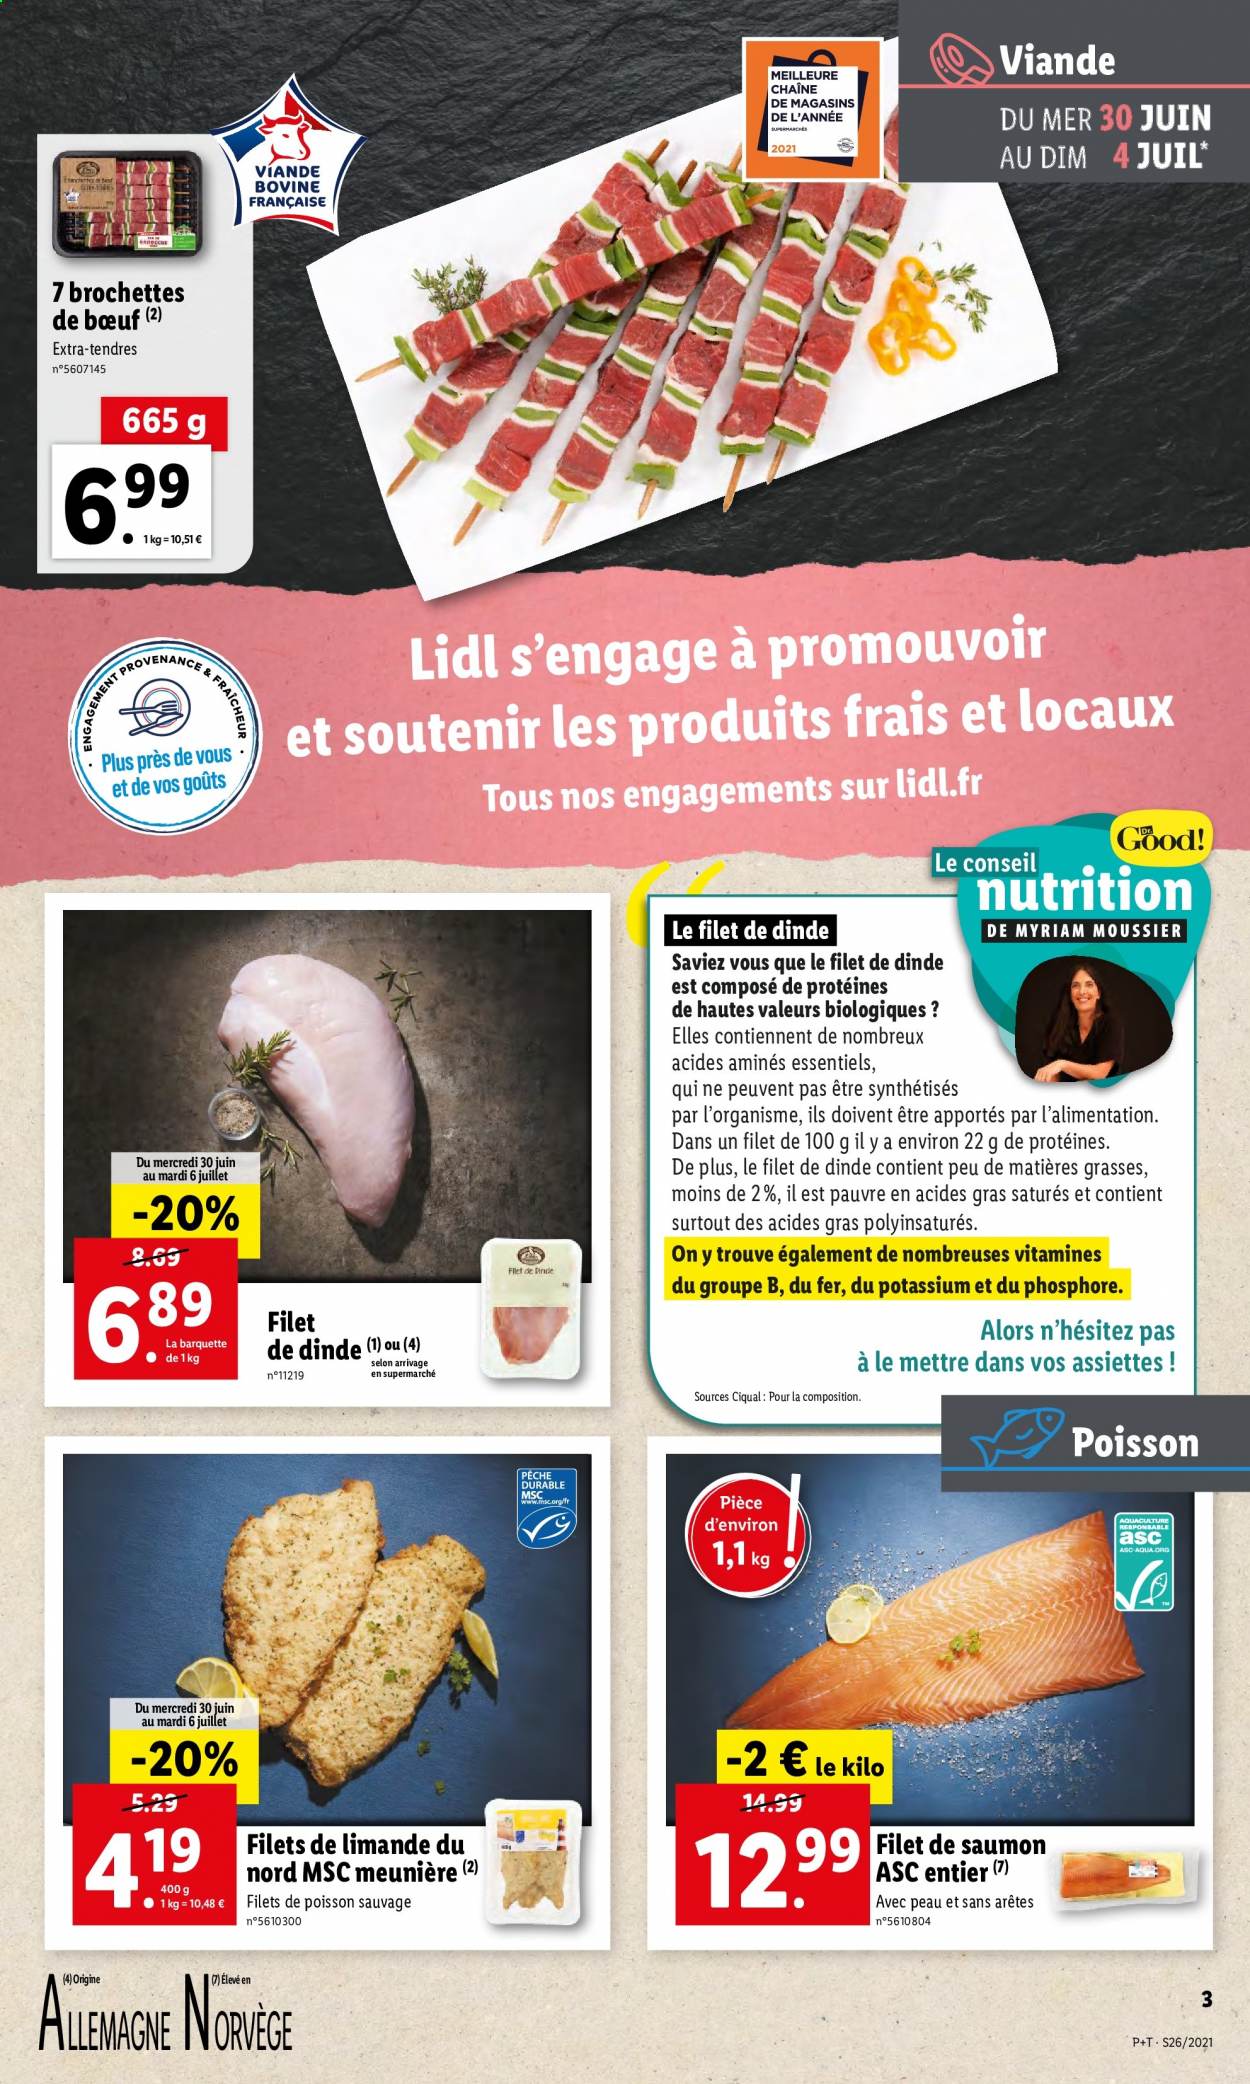 Catalogue Lidl - 30.06.2021 - 06.07.2021. Page 3.